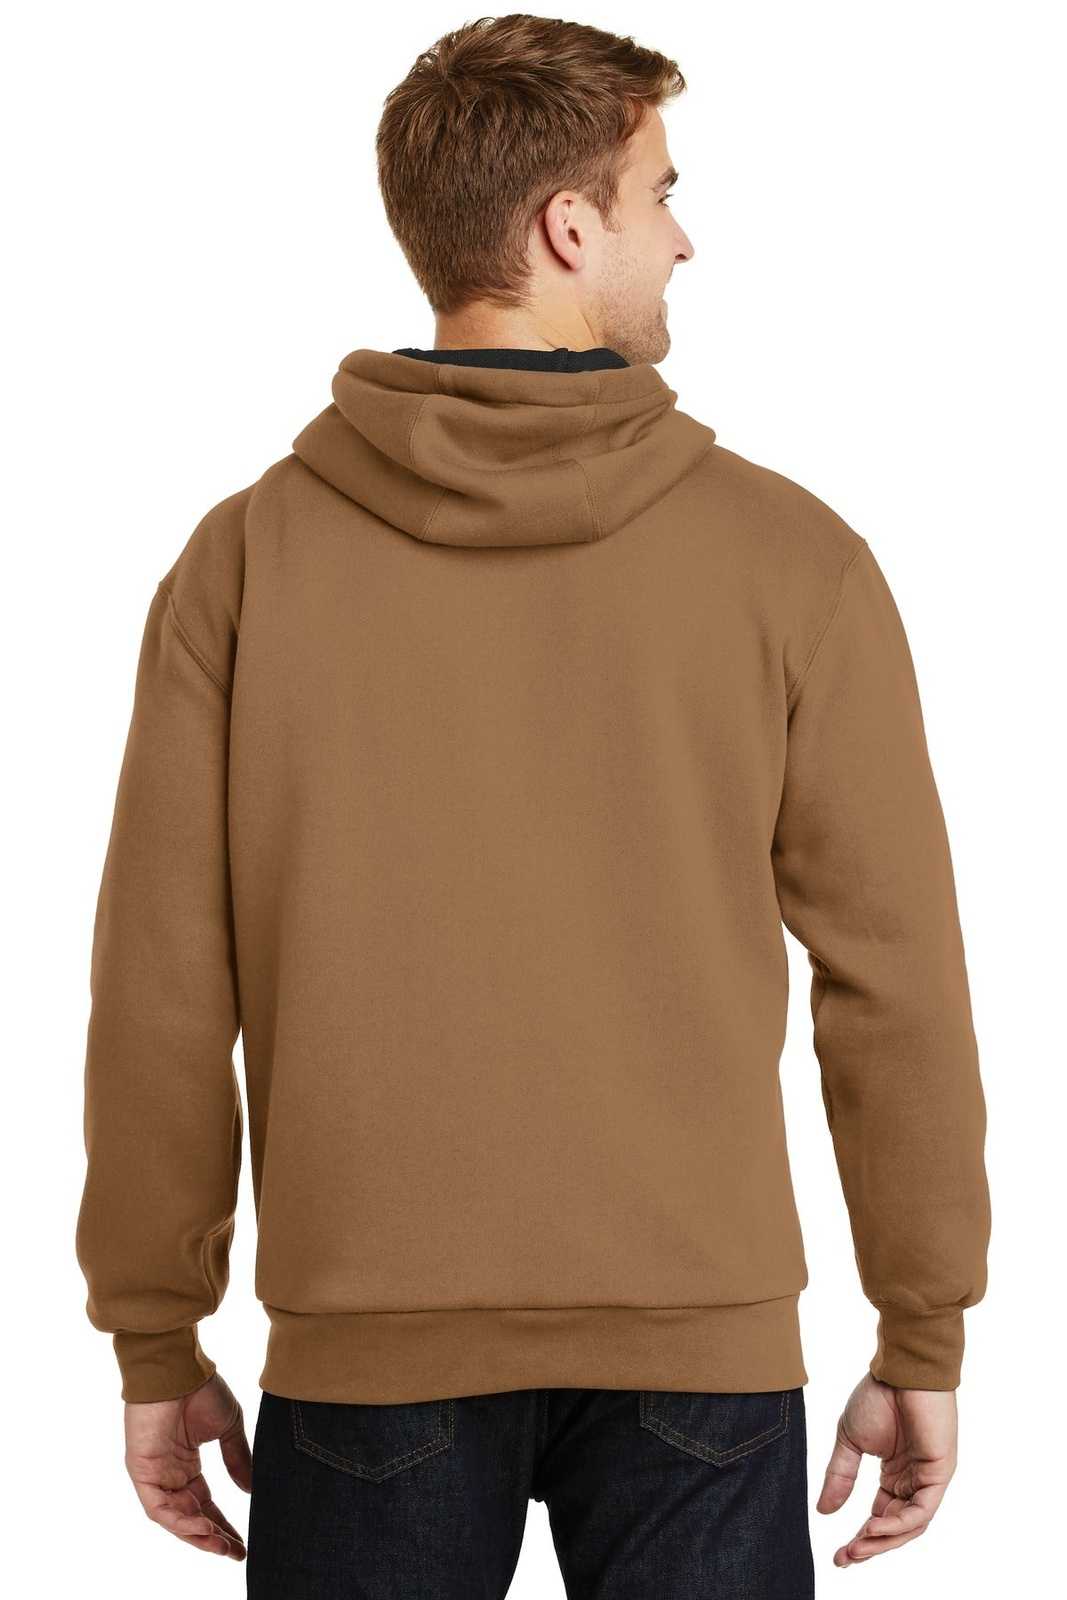 CornerStone CS620 Heavyweight Full-Zip Hooded Sweatshirt with Thermal Lining - Duck Brown - HIT a Double - 2